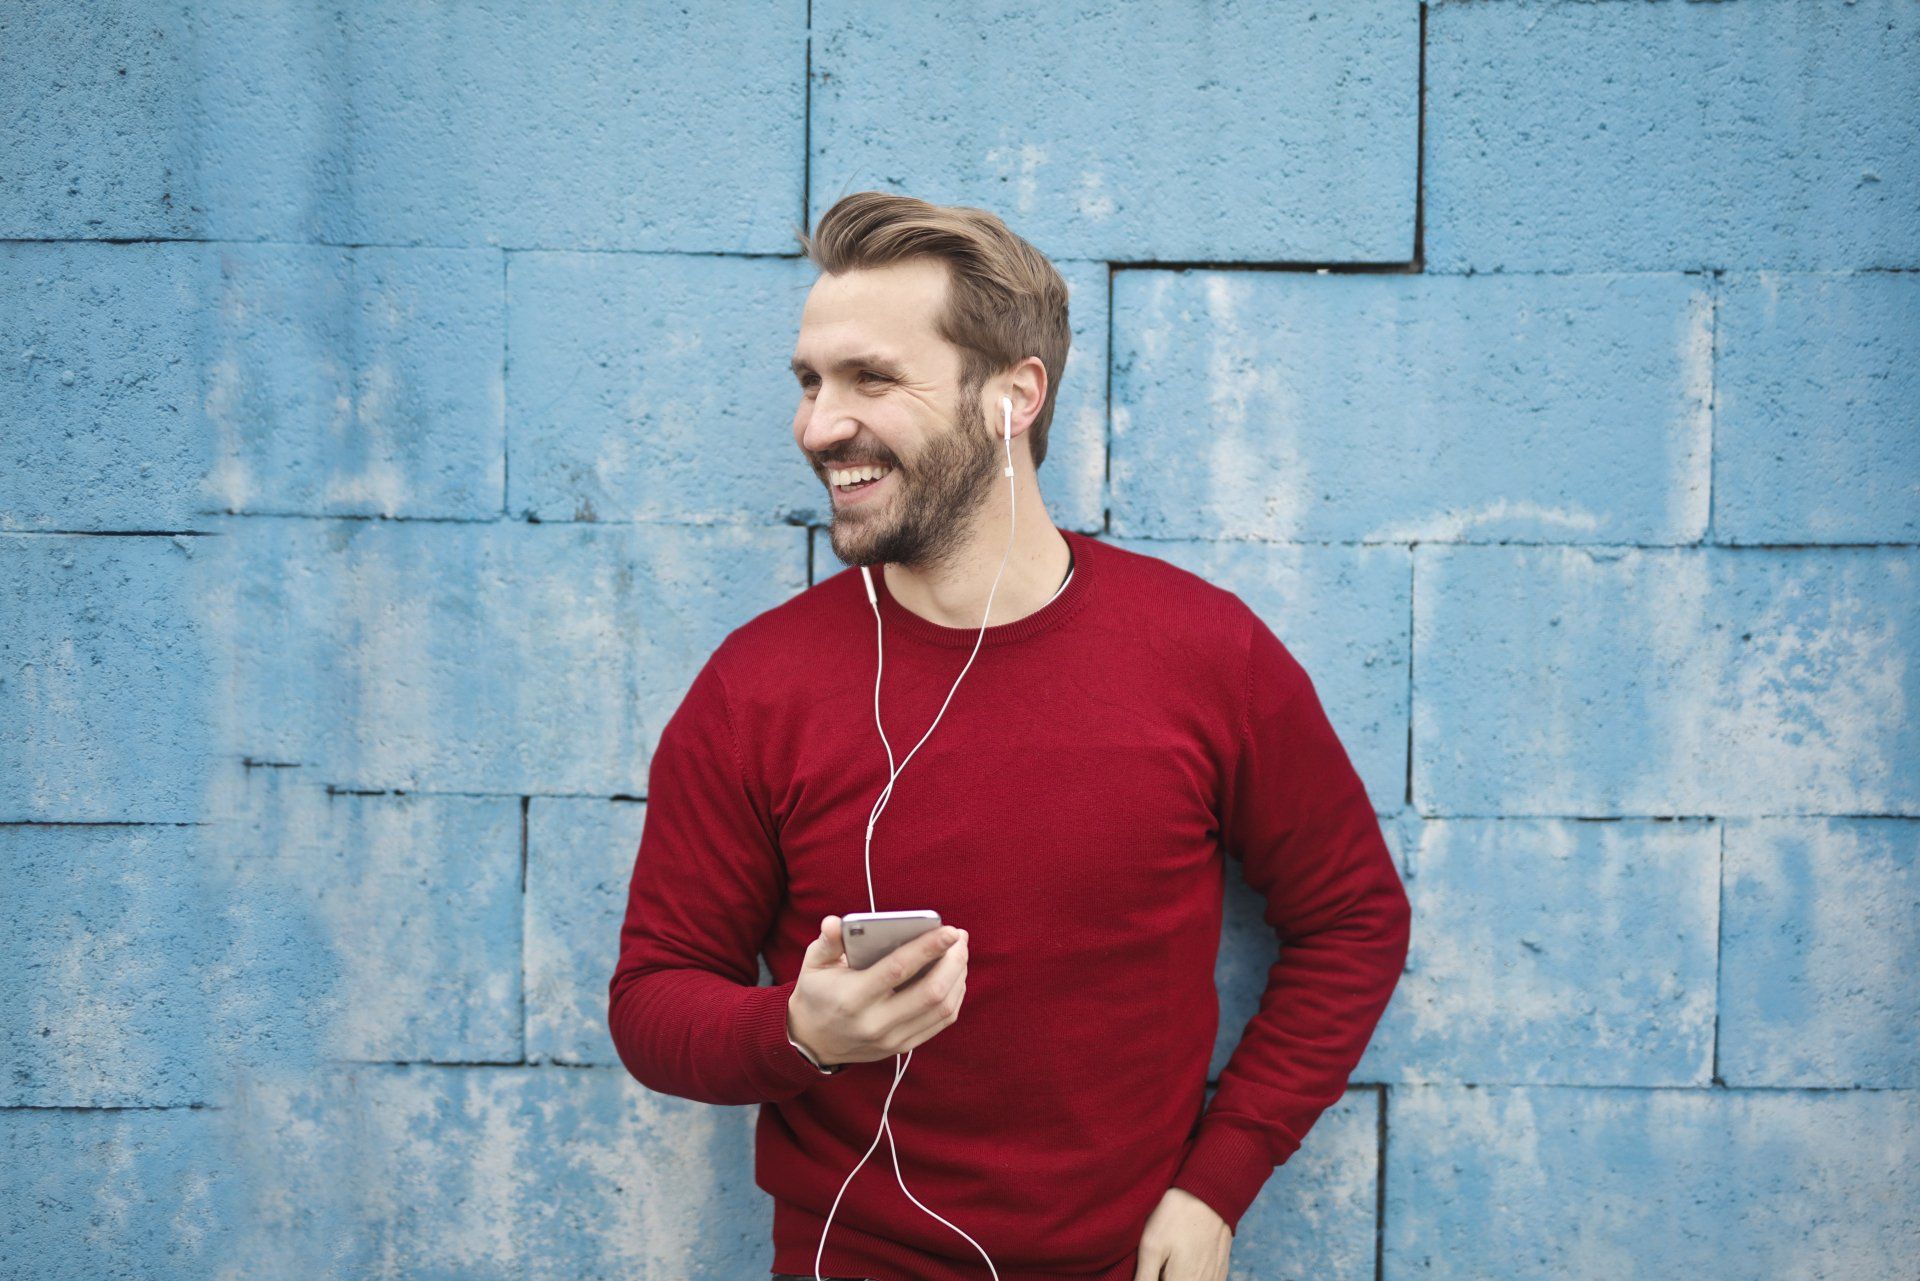 a man wearing headphones and a red sweater is listening to music on his phone .